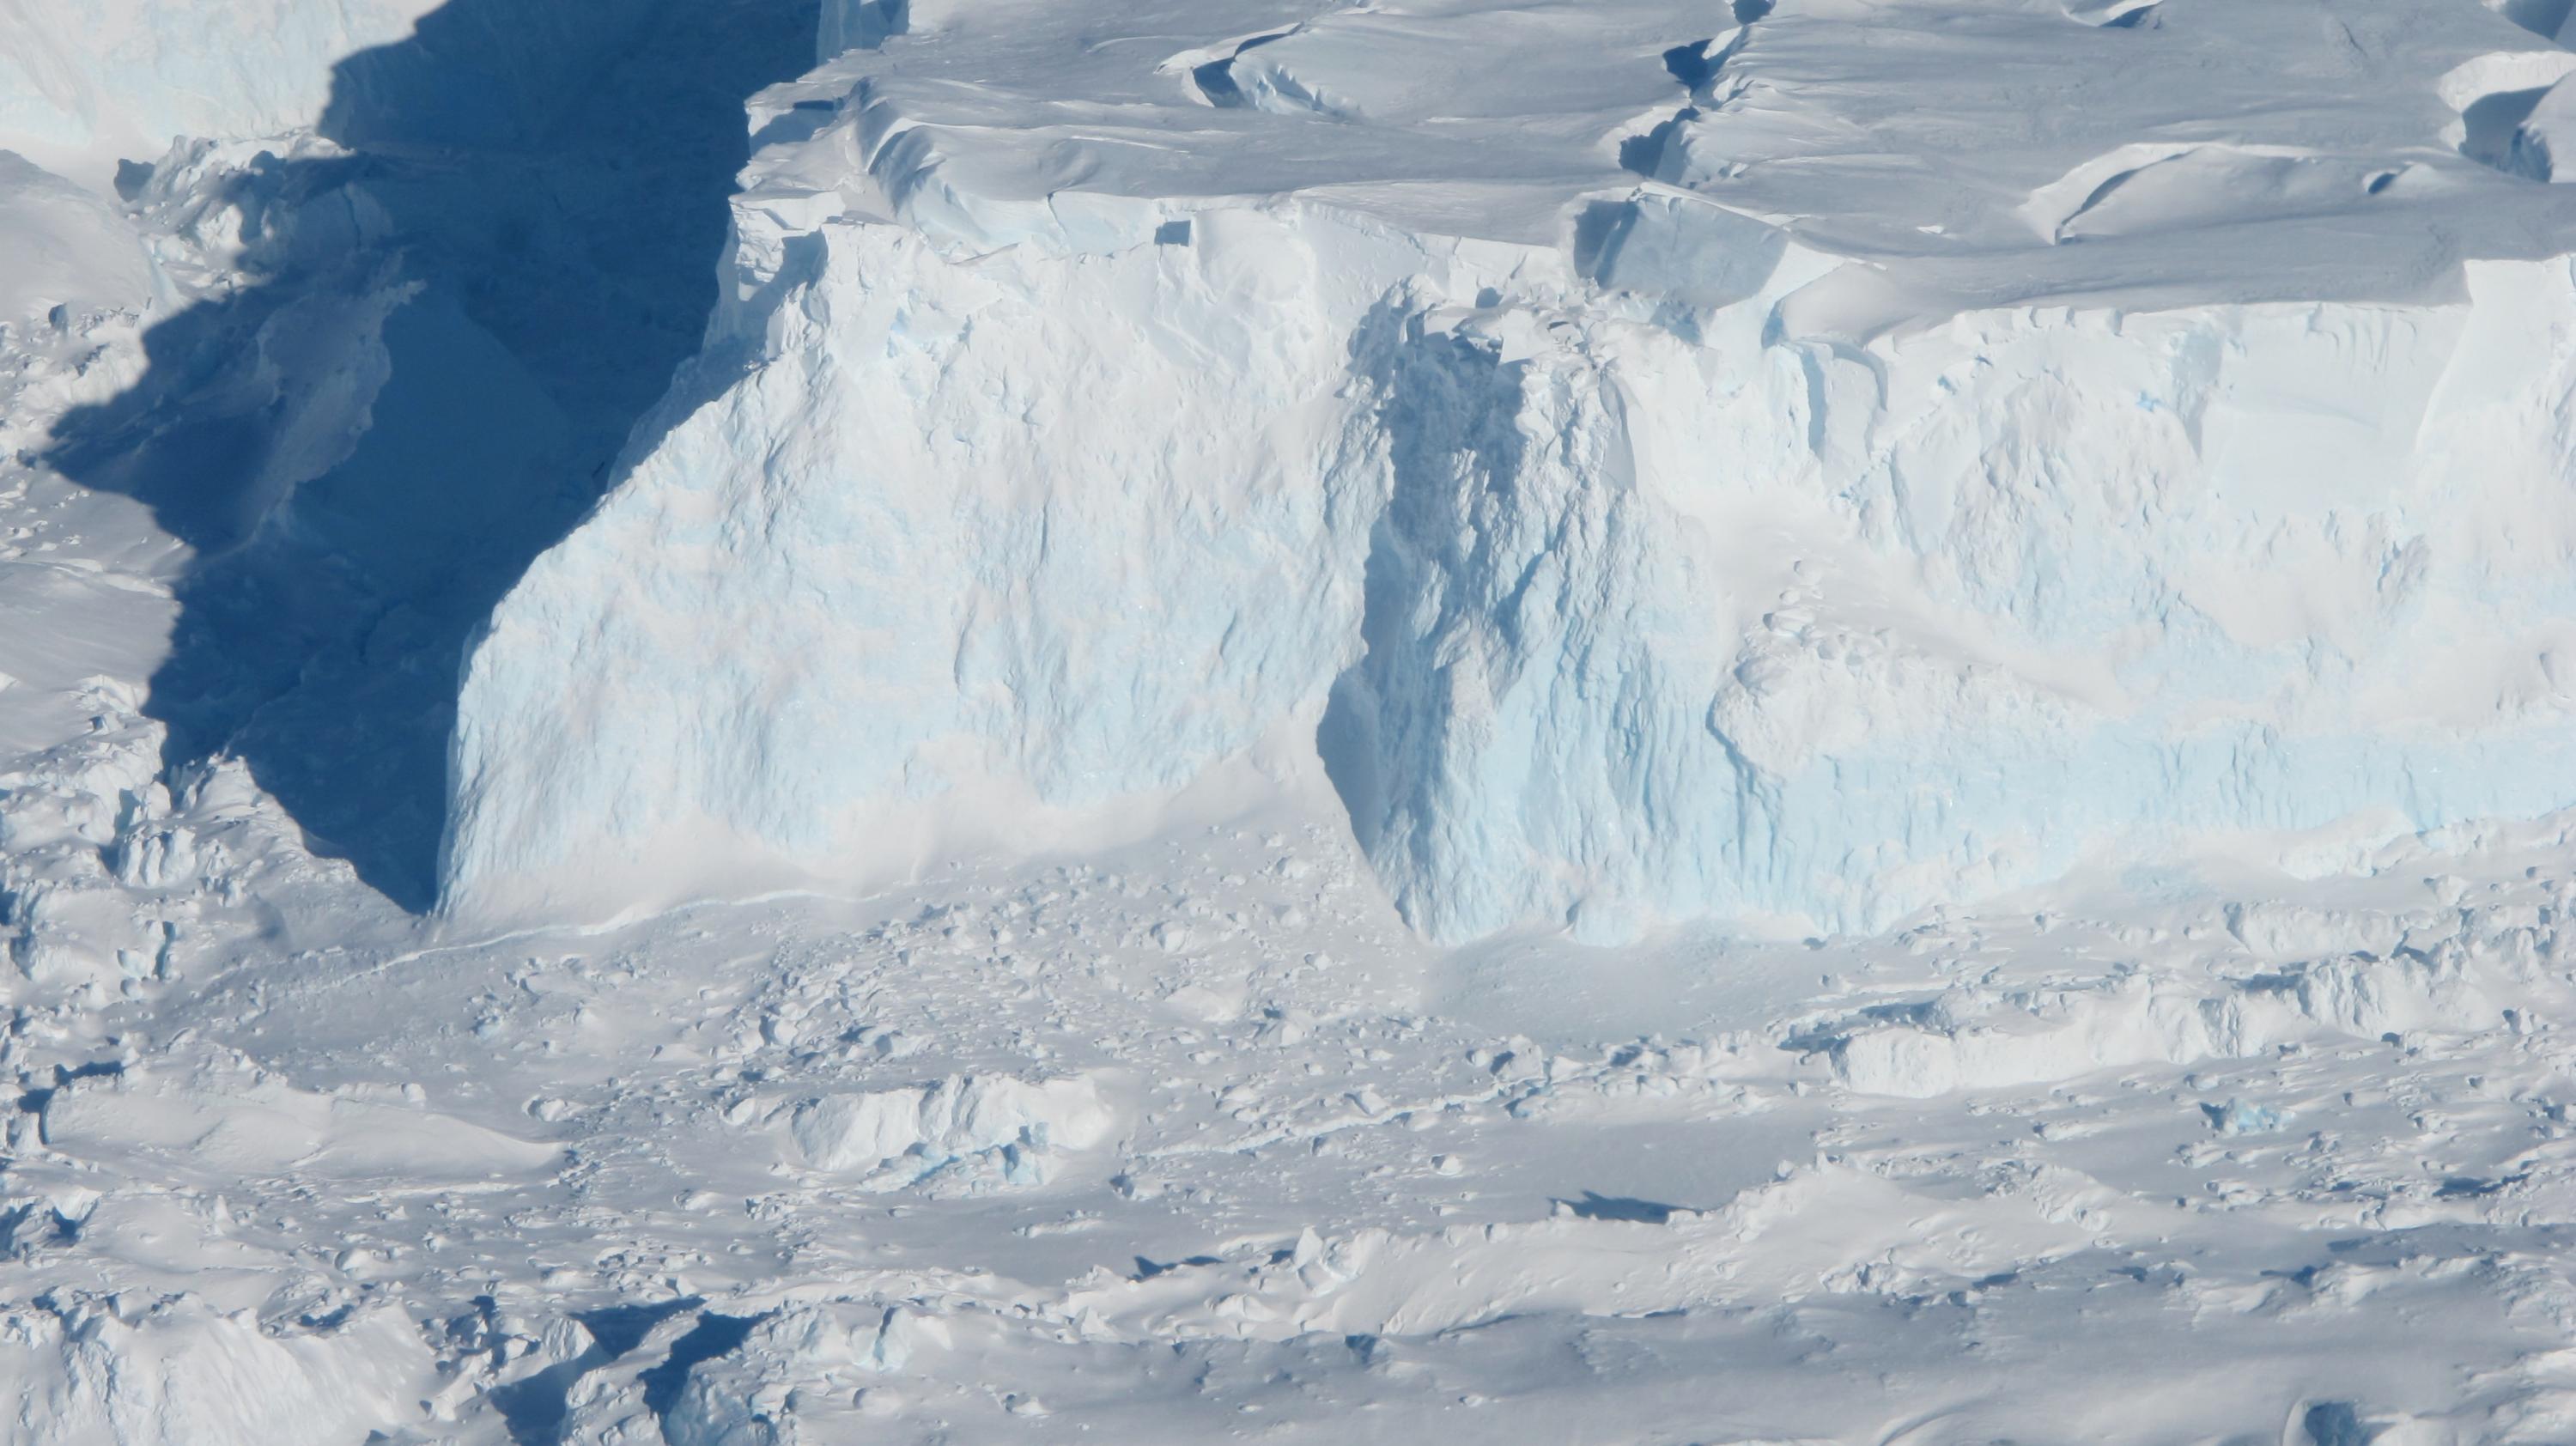 Thwaites Glacier's outer edge. As the glacier flows into the ocean, it becomes sea ice and drives up sea-level. Thwaites Glacier's ice is flowing particularly fast, and some researchers believe it may have already tipped into instability or be near that point, though this has not yet been established. Credit: NASA/James Yungel